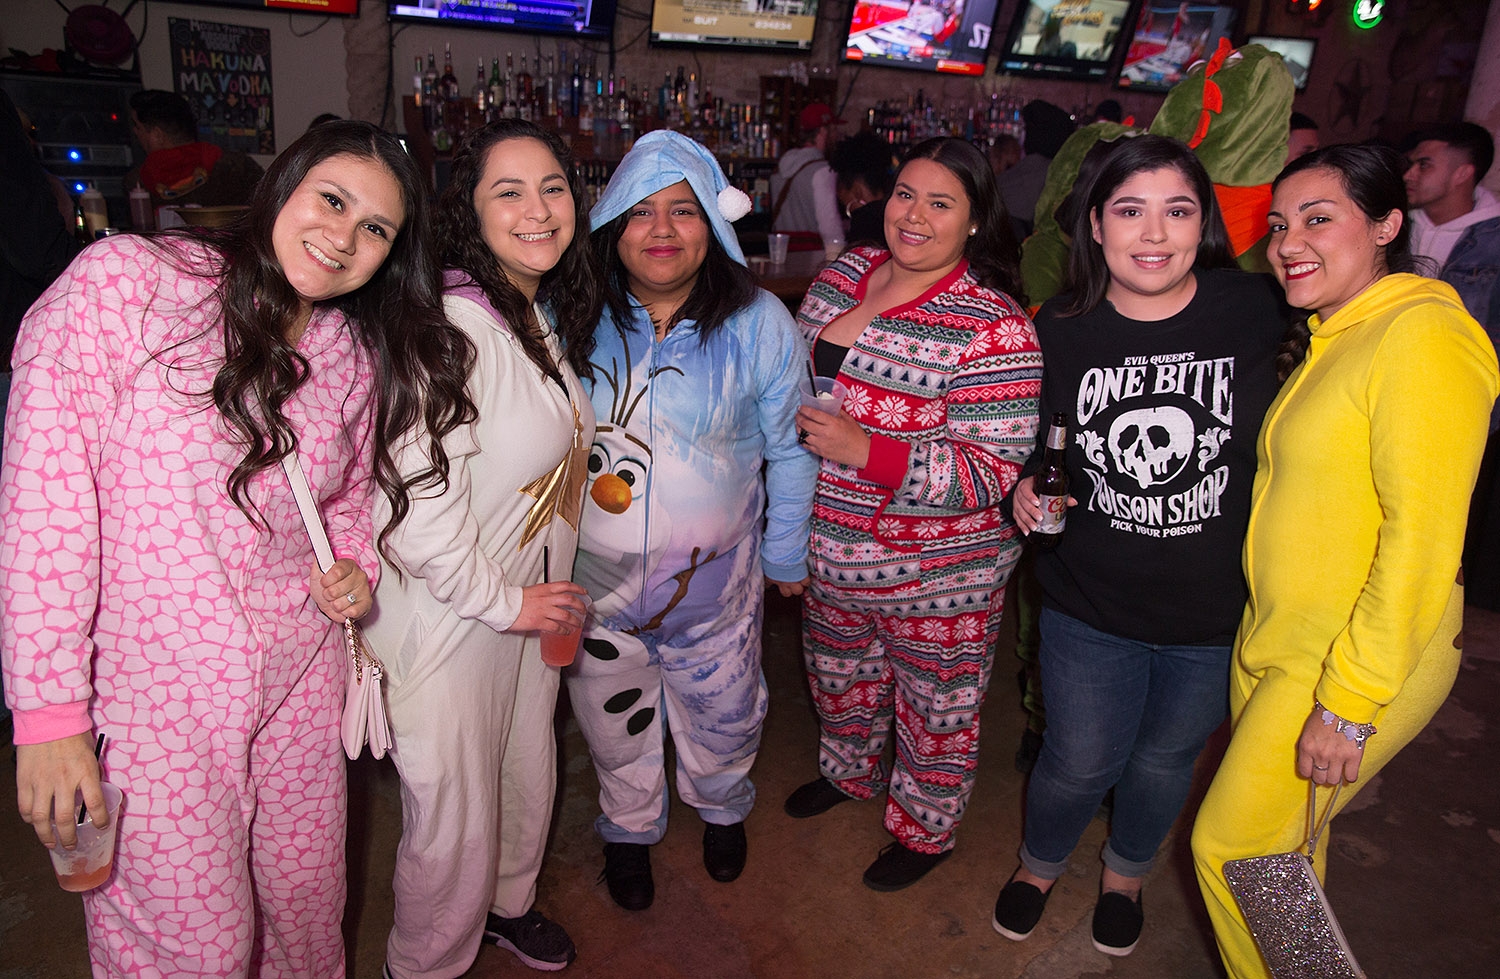 Pub runners have some drinks and bust a few moves during the onesie-themed Pub Run at Moses Rose's Hideout, Jan. 4, 2019. <em><b>Photo by B. Kay Richter | Heron contributor</b></em>